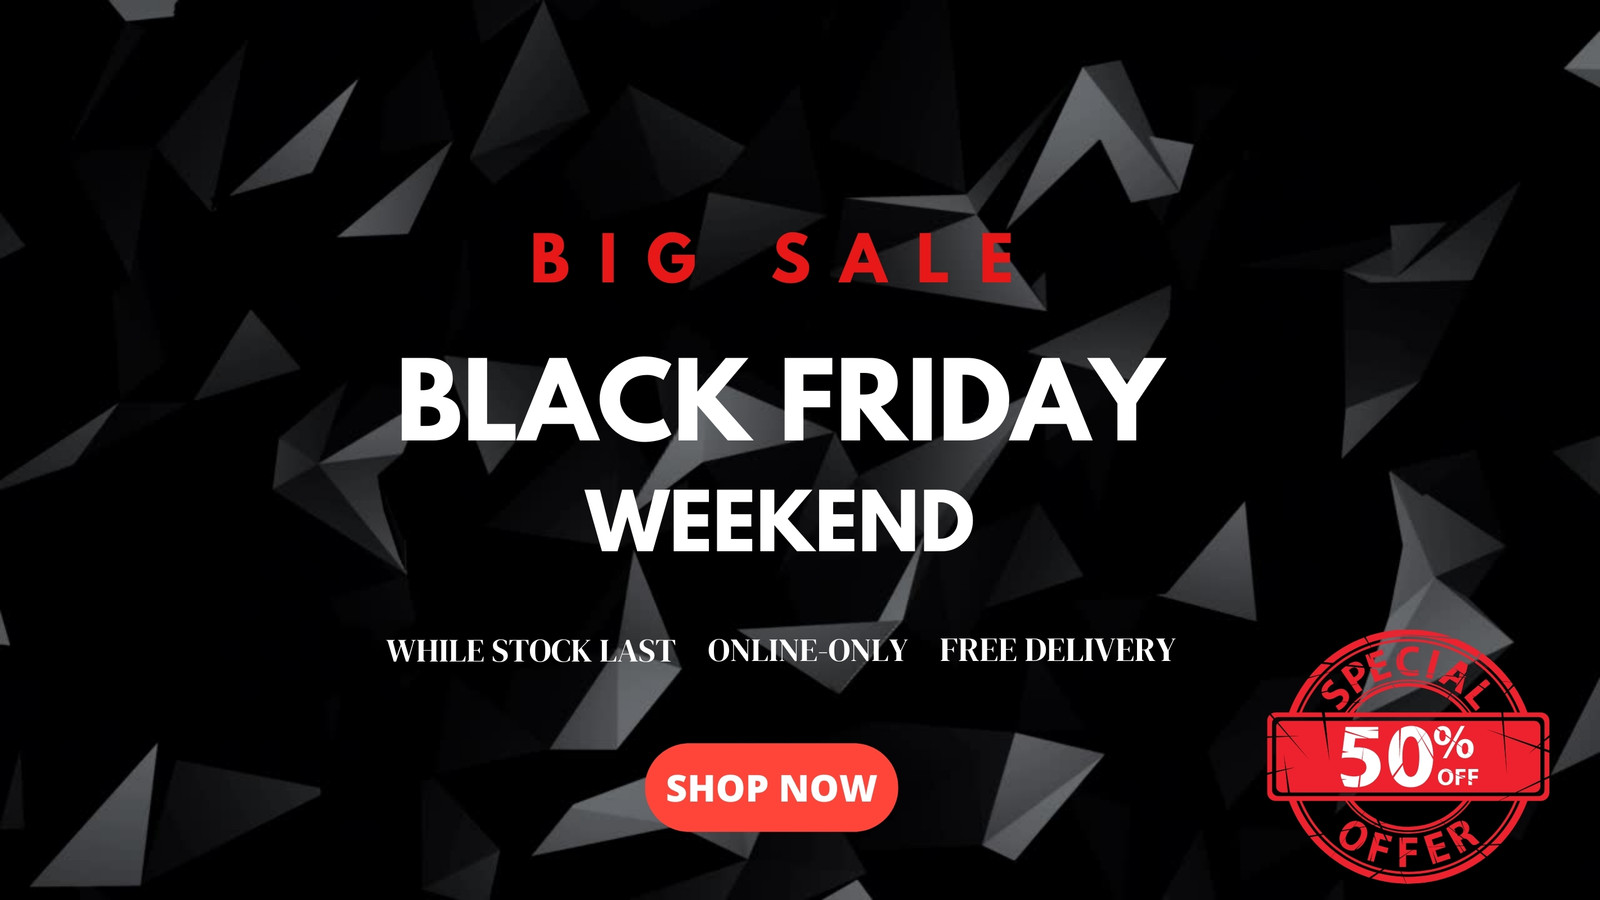 Free Black Friday video templates to edit online | Canva